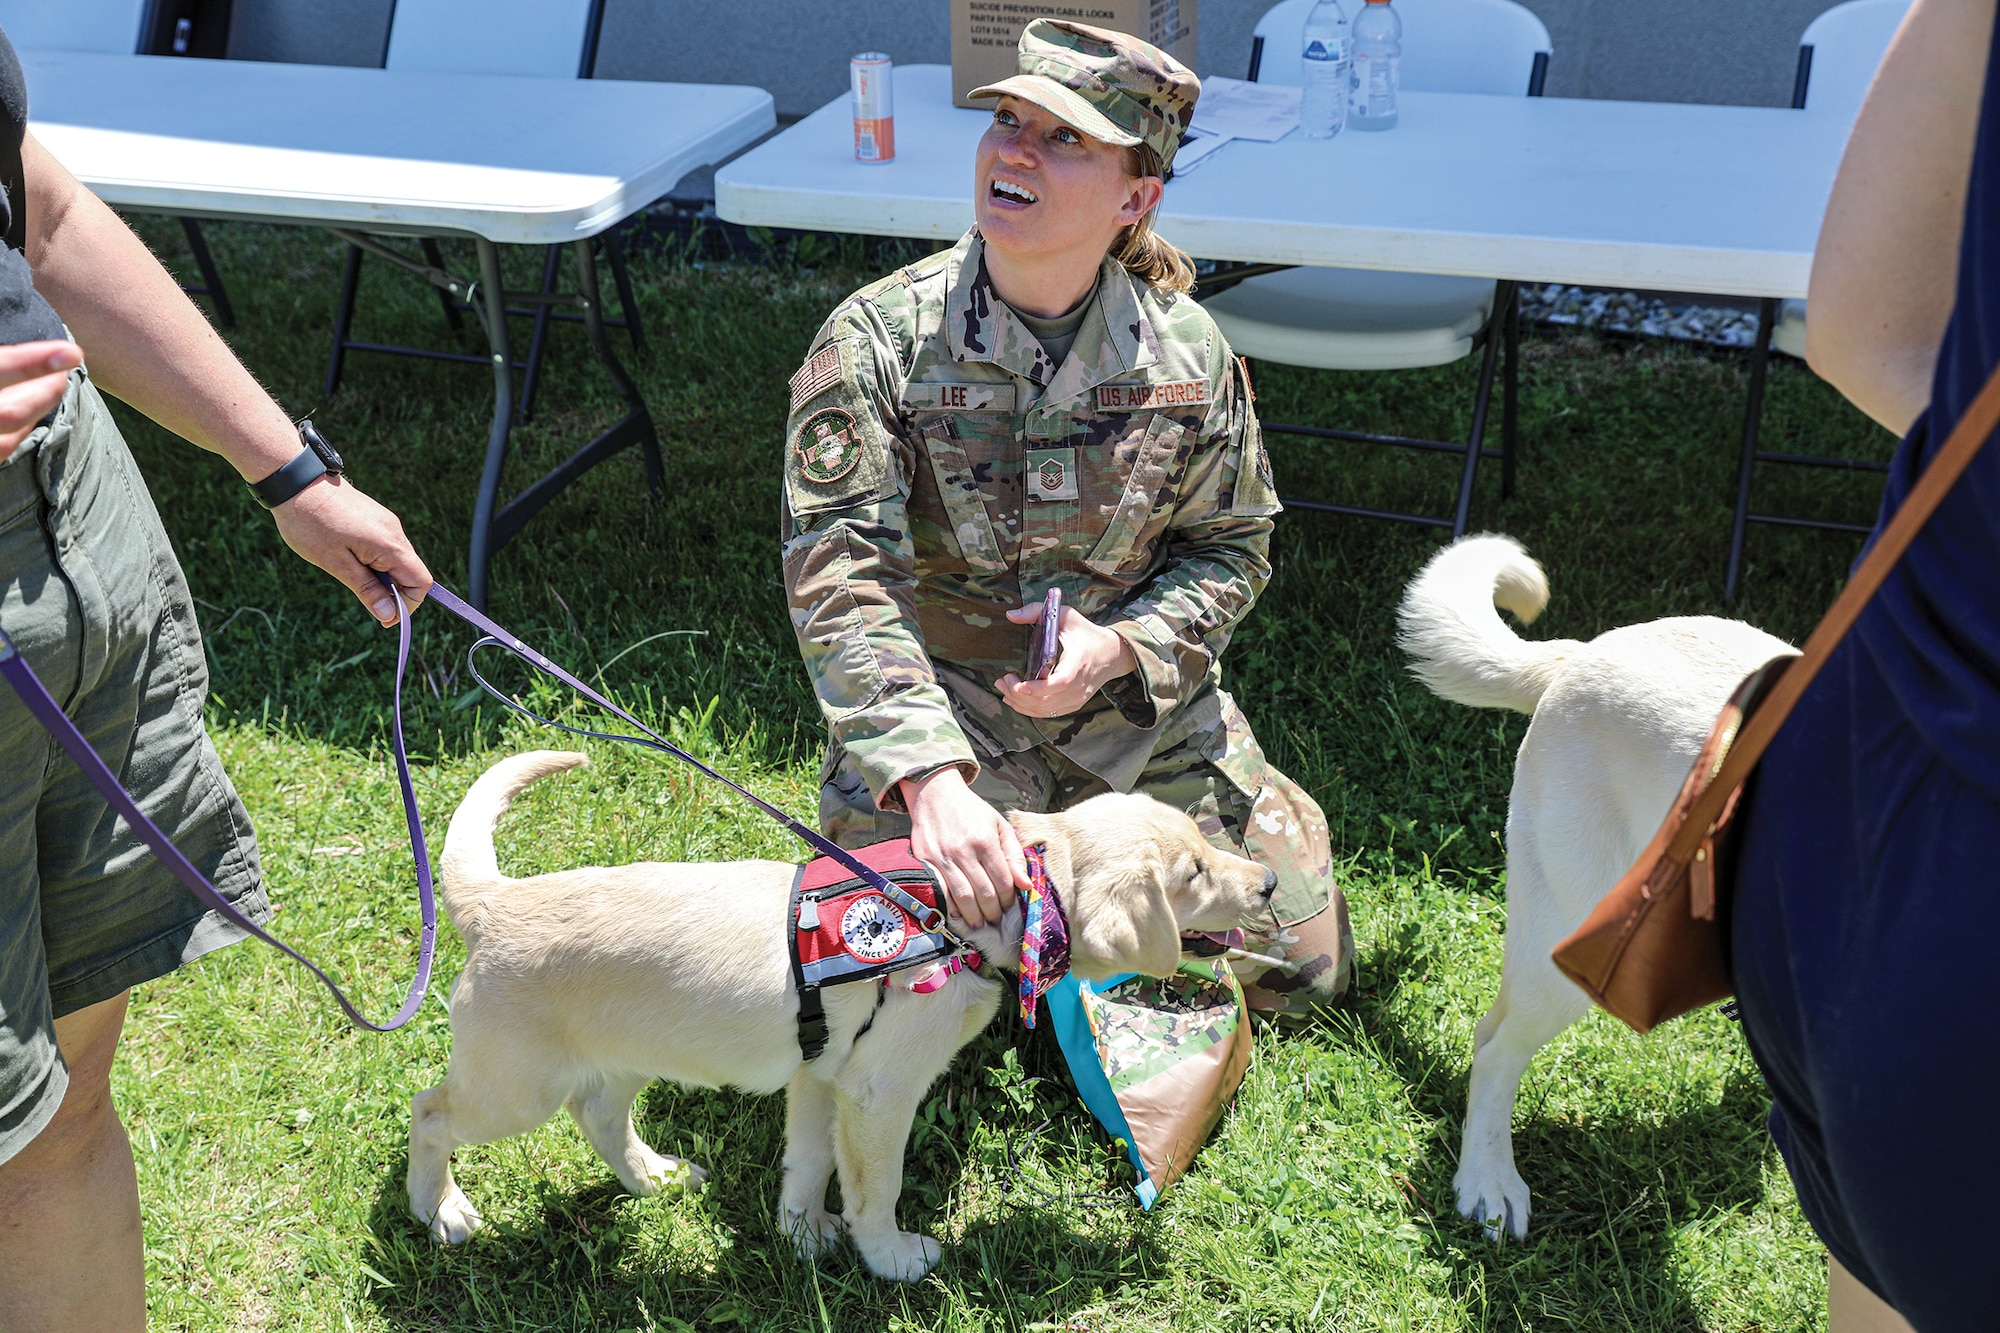 Master Sgt. Michelle Lee, 445th Aeromedical Staging Squadron, interacts with a service dog during a wing-wide wellness fair May 15, 2022, at Wright-Patterson Air Force Base, Ohio. The wellness fair gave Airmen an opportunity to socialize and obtain information about the various on-base and off-base helping agencies.